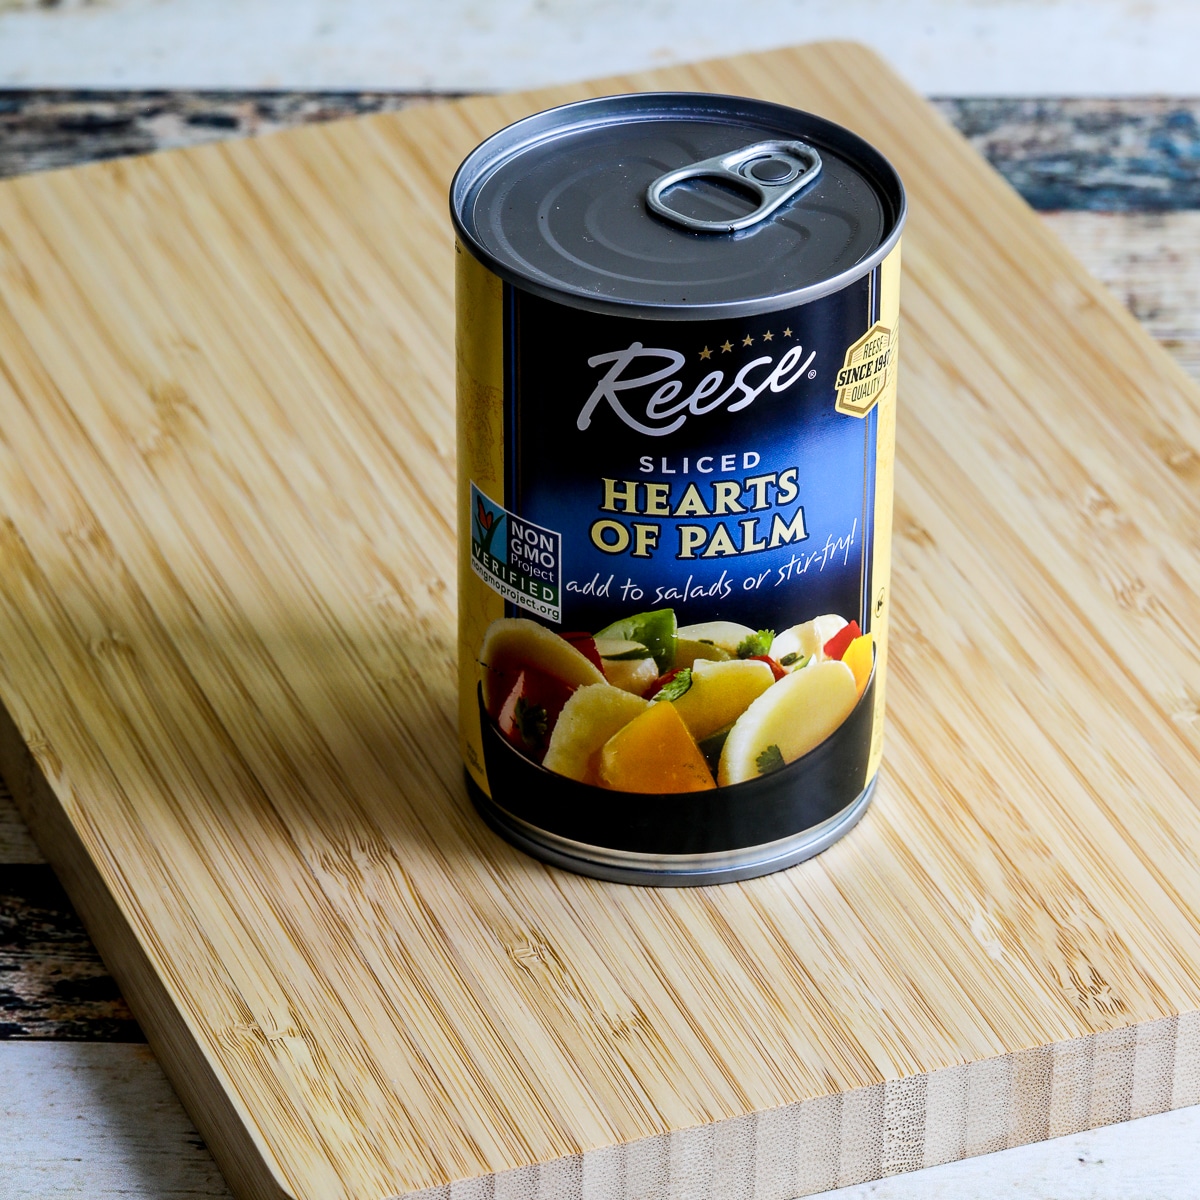 A square image of a can of palm hearts on a cutting board.